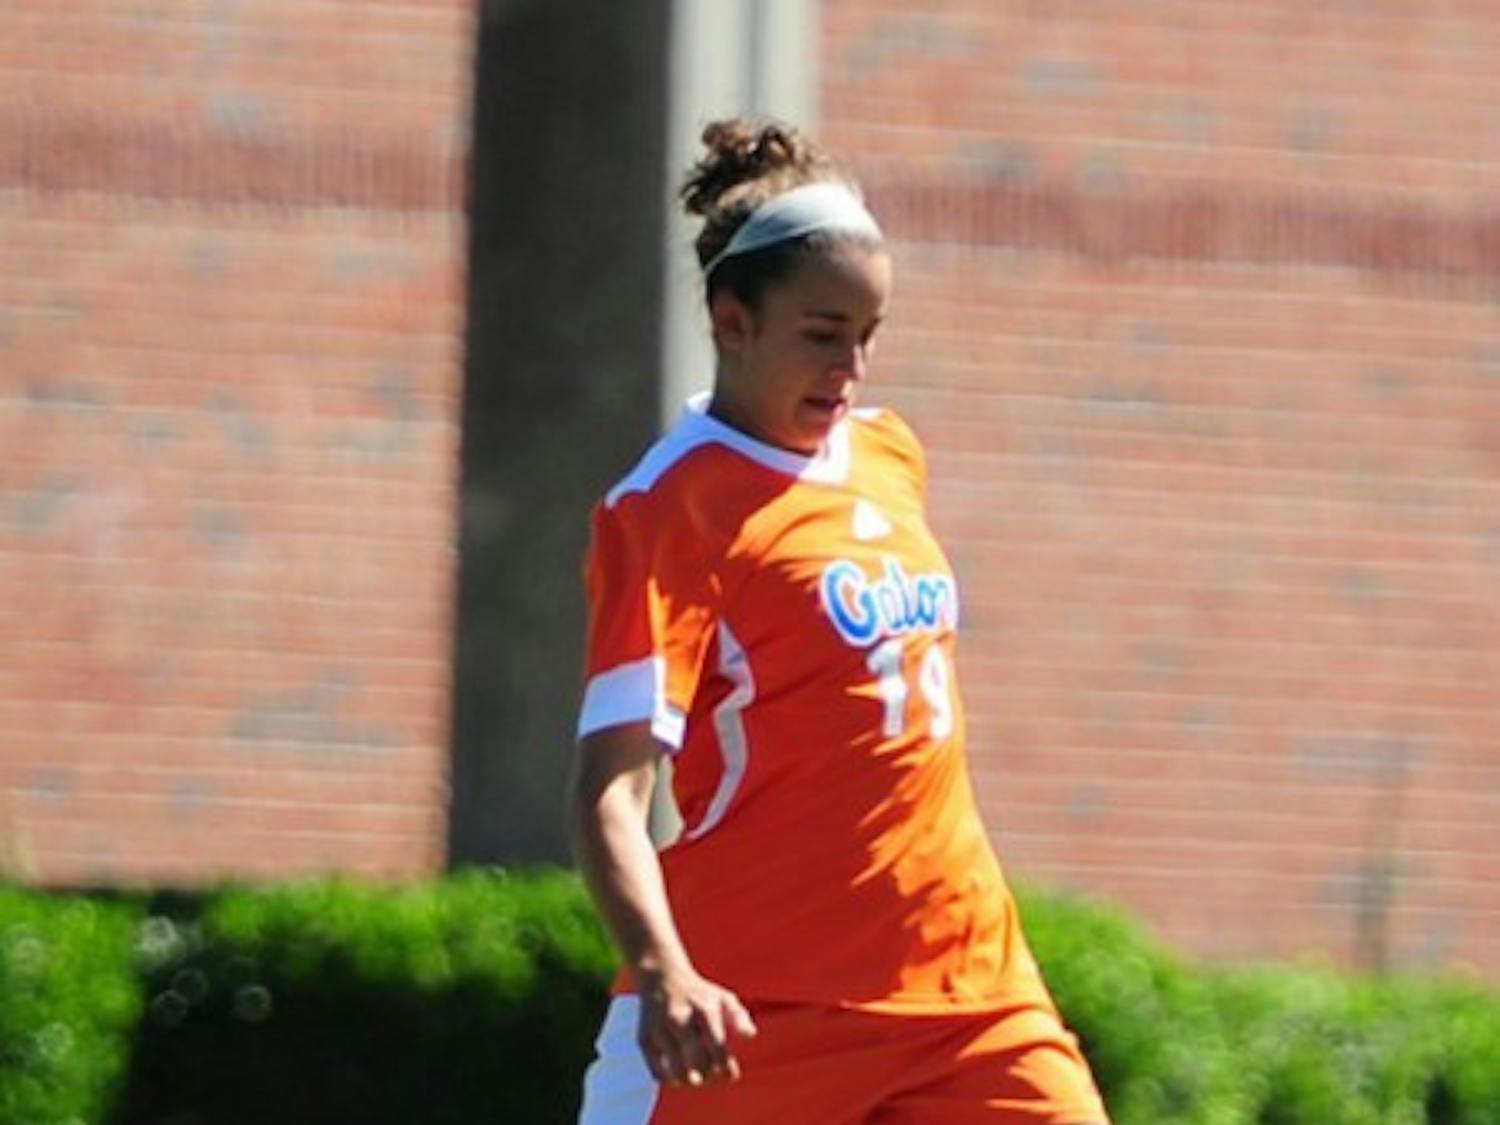 Sophomore midfielder Havana Solaun scored the first goal of the game against Ole Miss early in the first half. Solaun leads the Gators with four goals on the season.